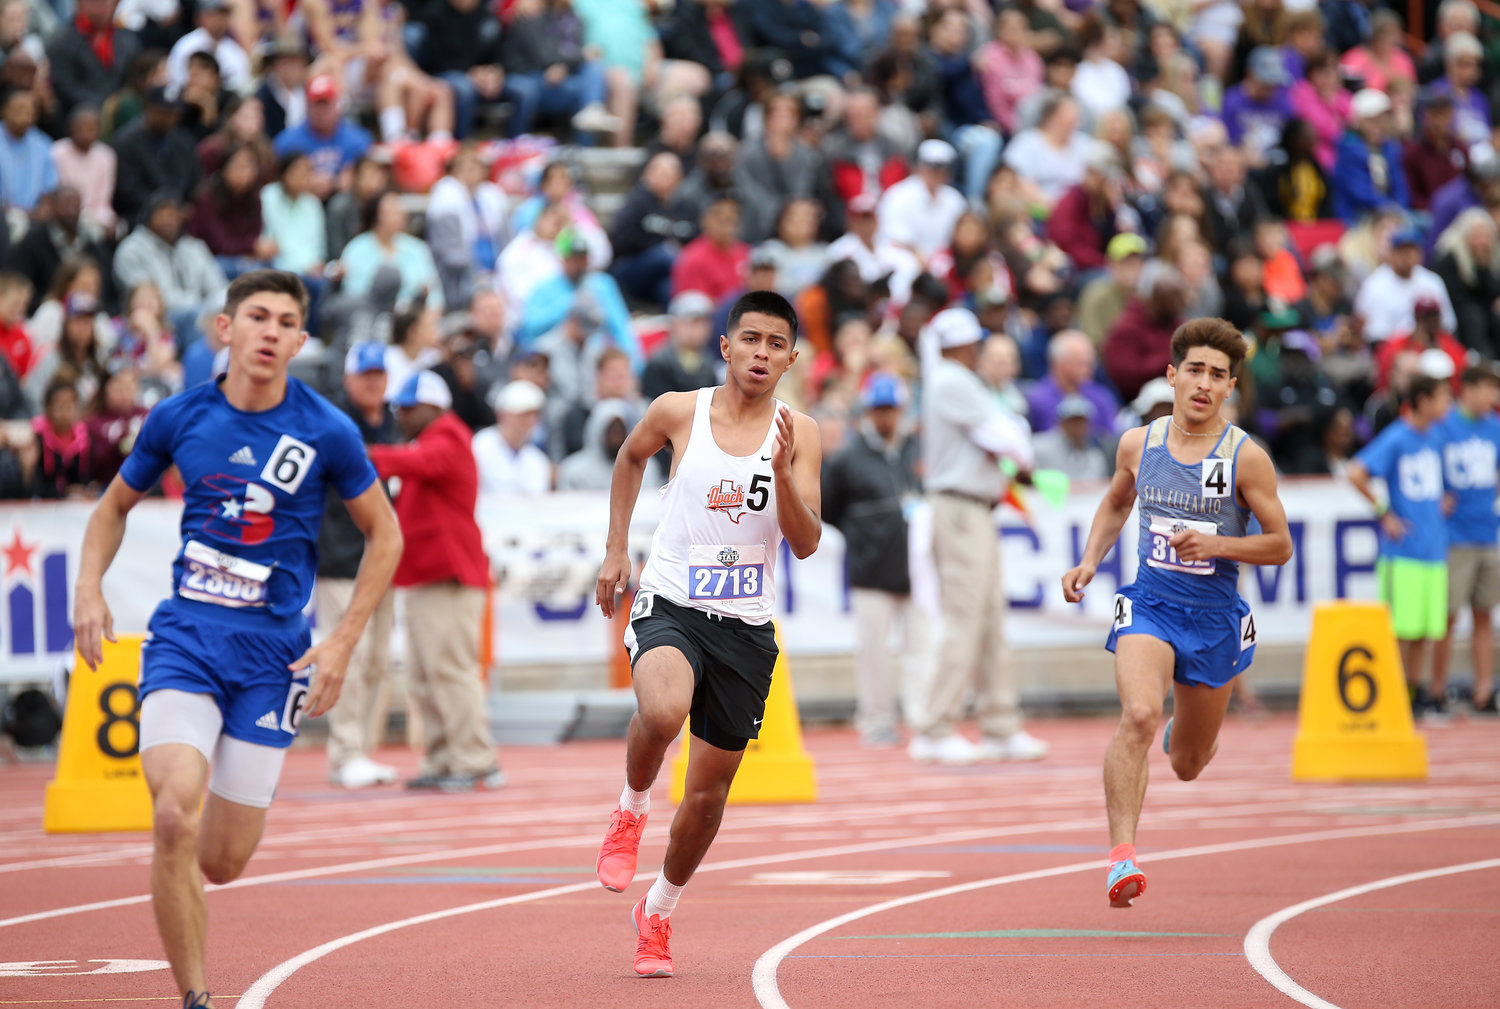 Antonio Hernandez of Gonzales High School runs in the Class 4A boys 800-meter run at the UIL State Track and Field Meet on Saturday, May 11, 2019 at Mike A. Myers Stadium in Austin, Texas.